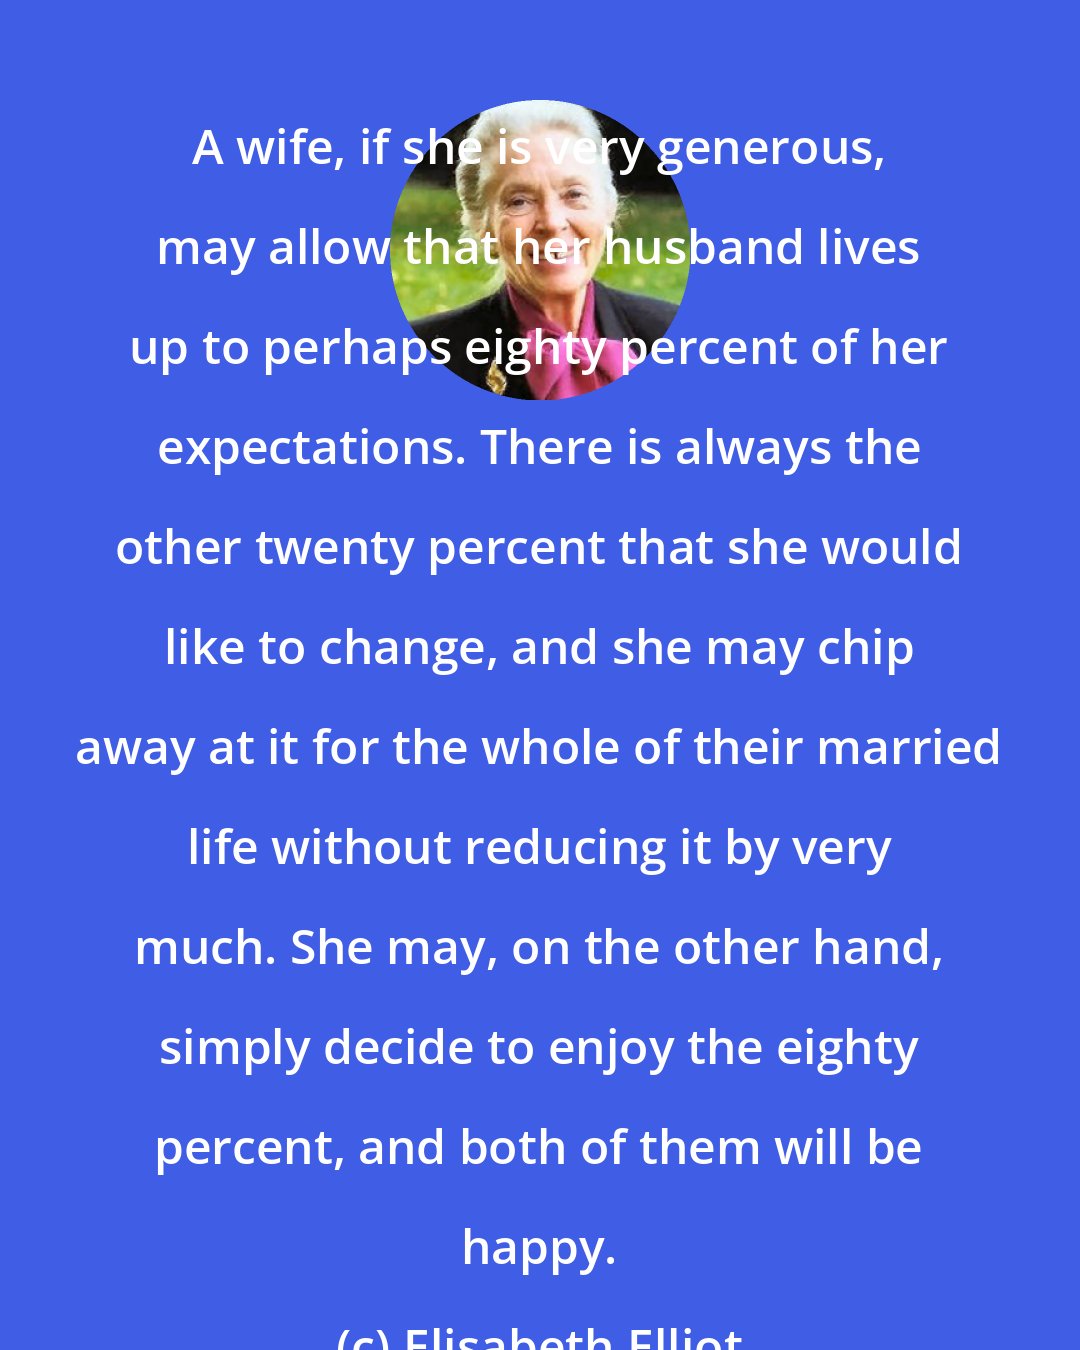 Elisabeth Elliot: A wife, if she is very generous, may allow that her husband lives up to perhaps eighty percent of her expectations. There is always the other twenty percent that she would like to change, and she may chip away at it for the whole of their married life without reducing it by very much. She may, on the other hand, simply decide to enjoy the eighty percent, and both of them will be happy.